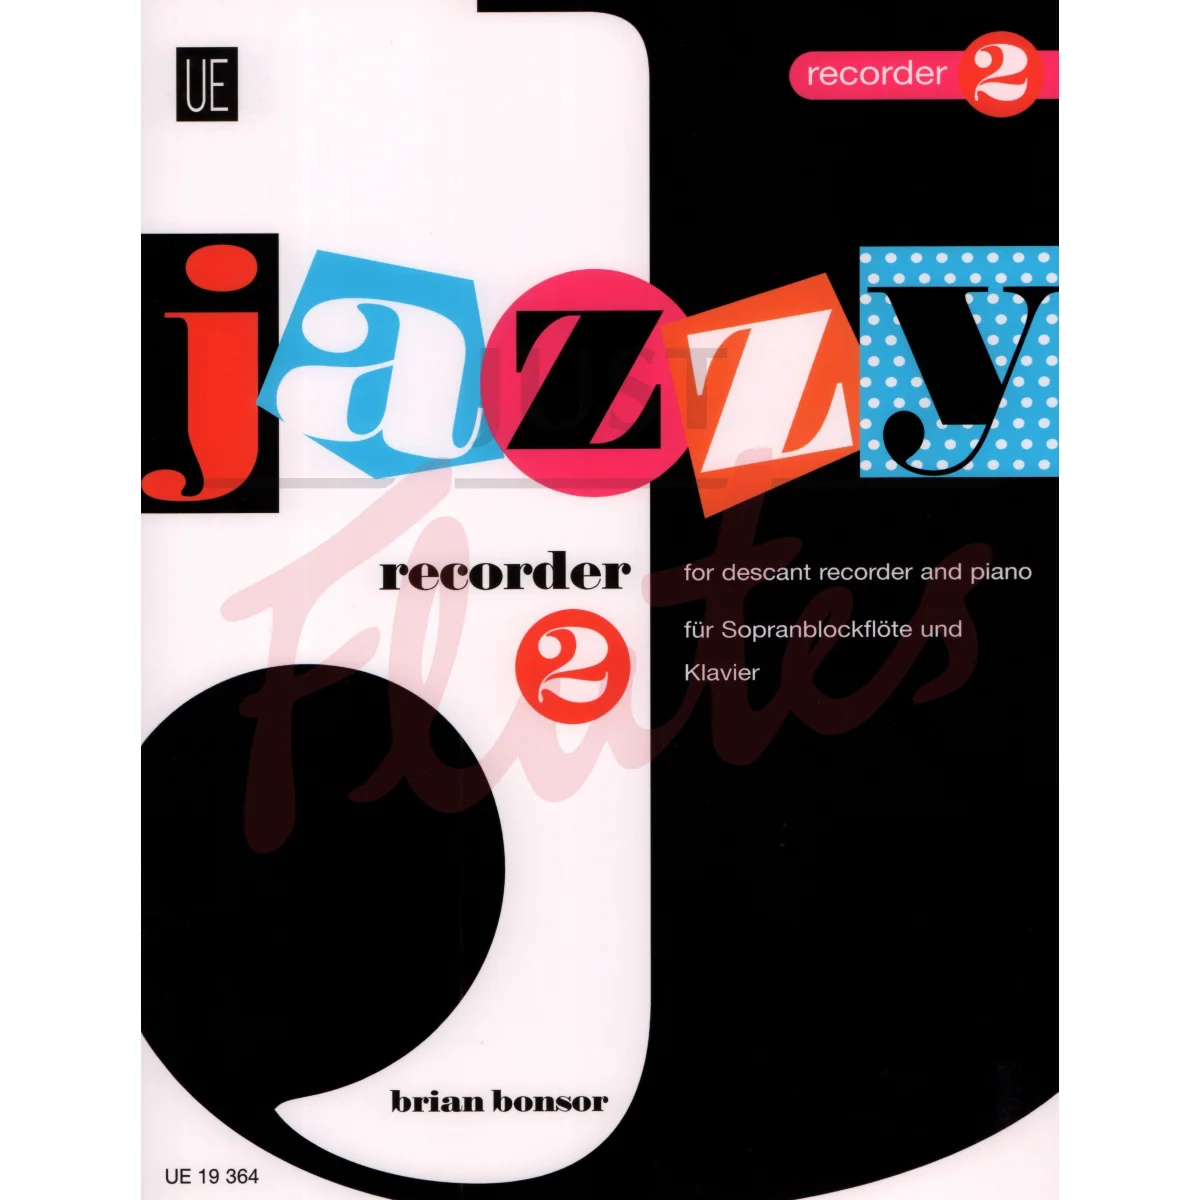 Jazzy Recorder 2 for Descant Recorder